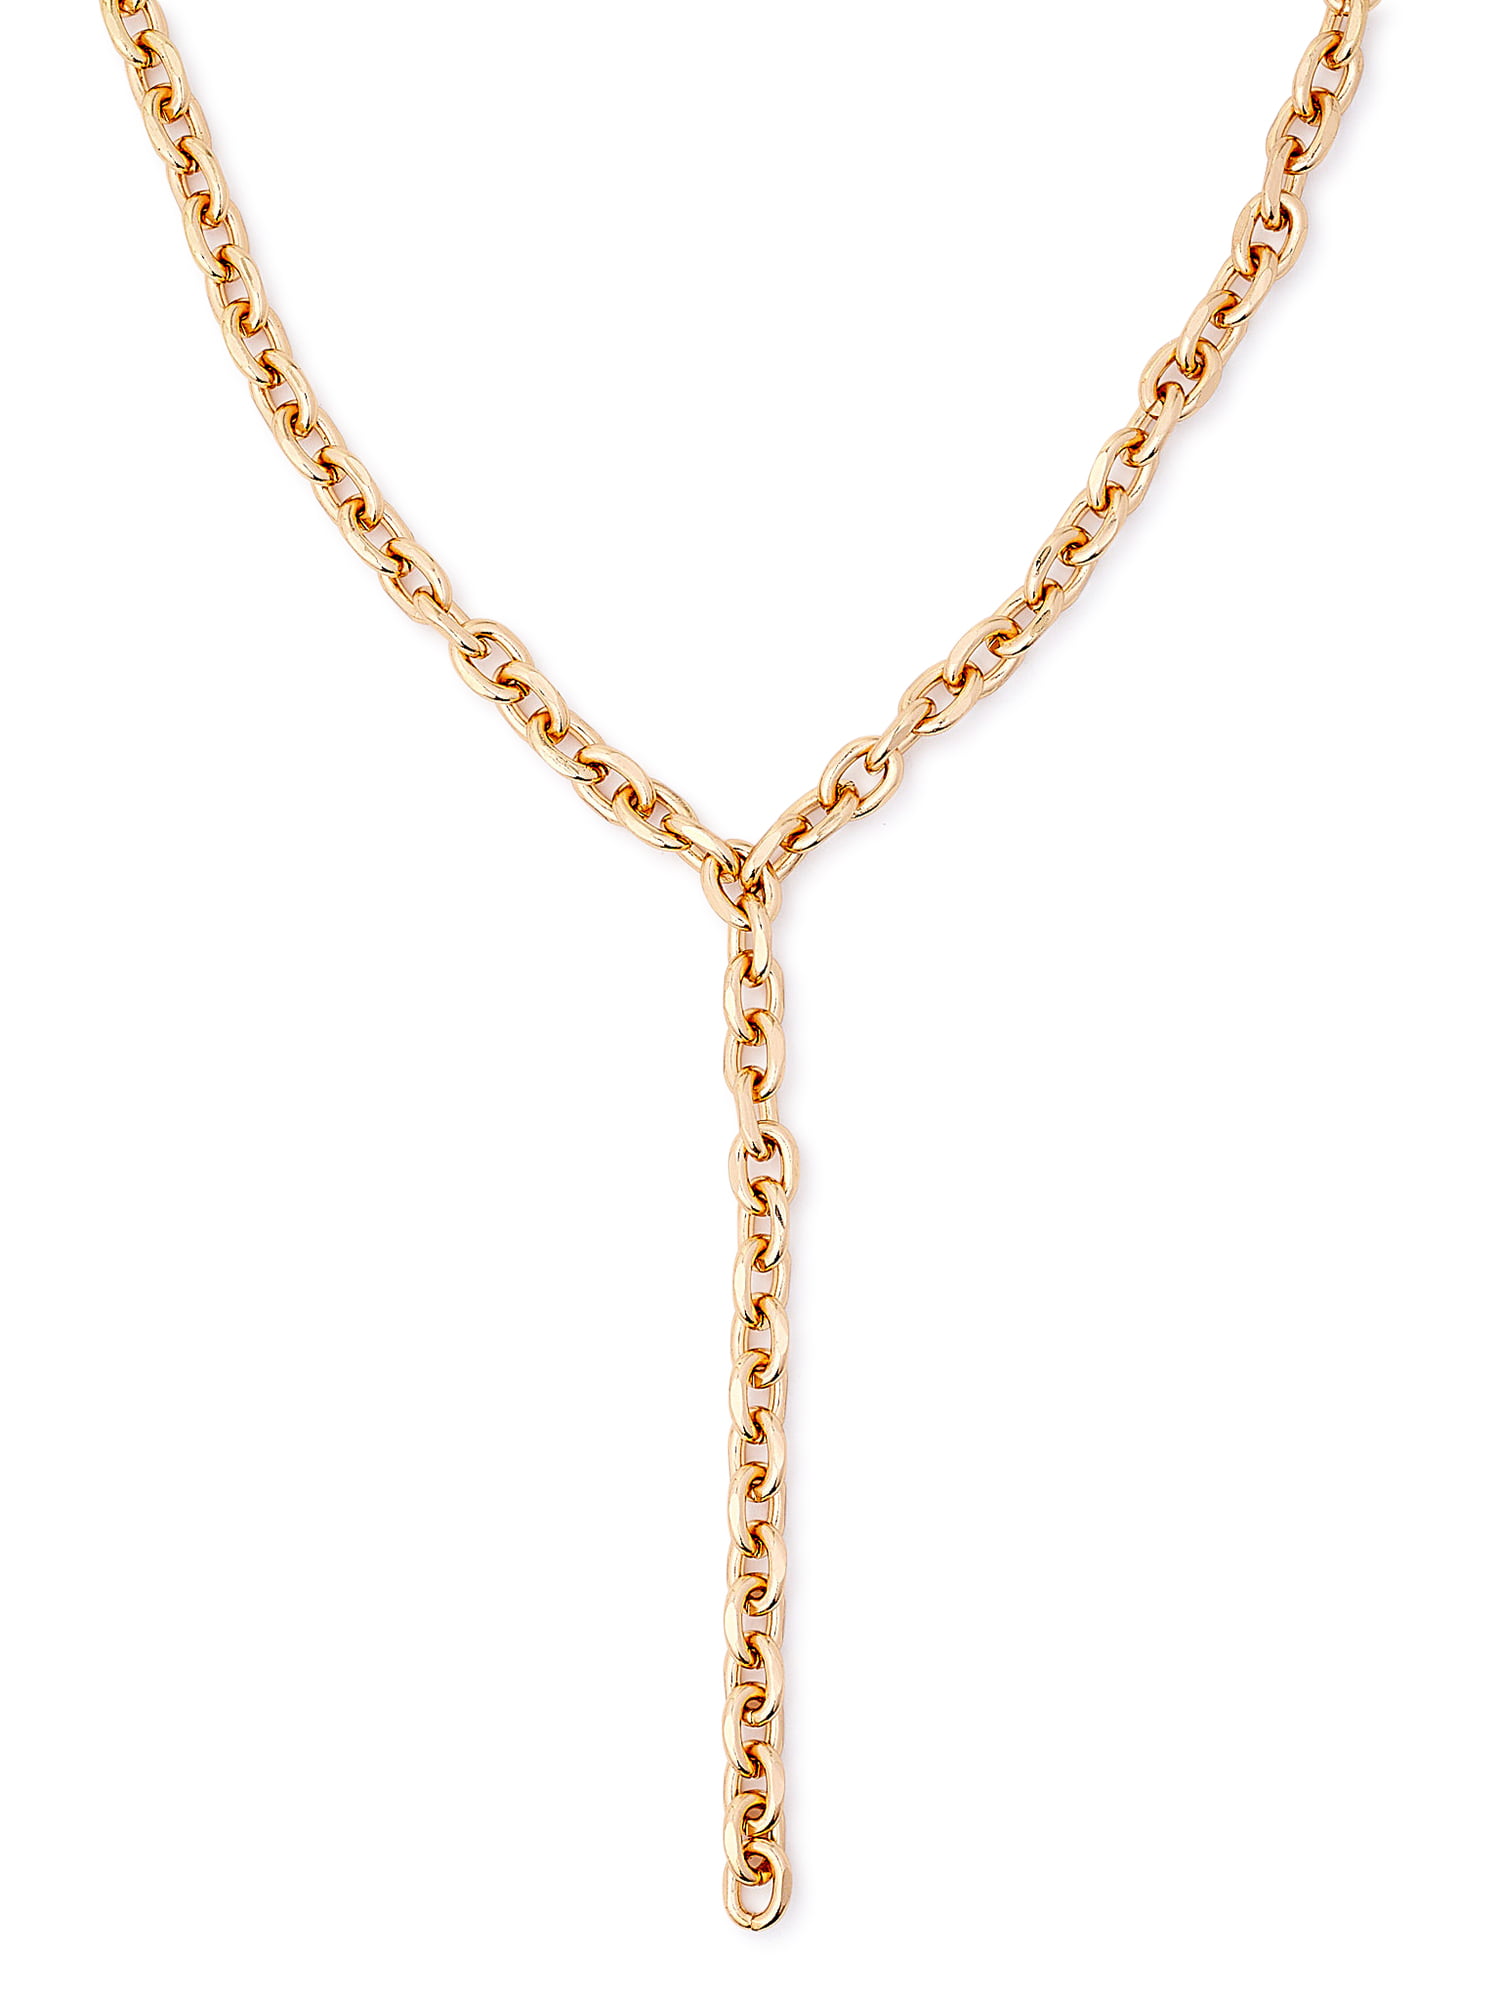 Goldtone Curb Chain Link Accented with Rhinestones Necklace 15.5